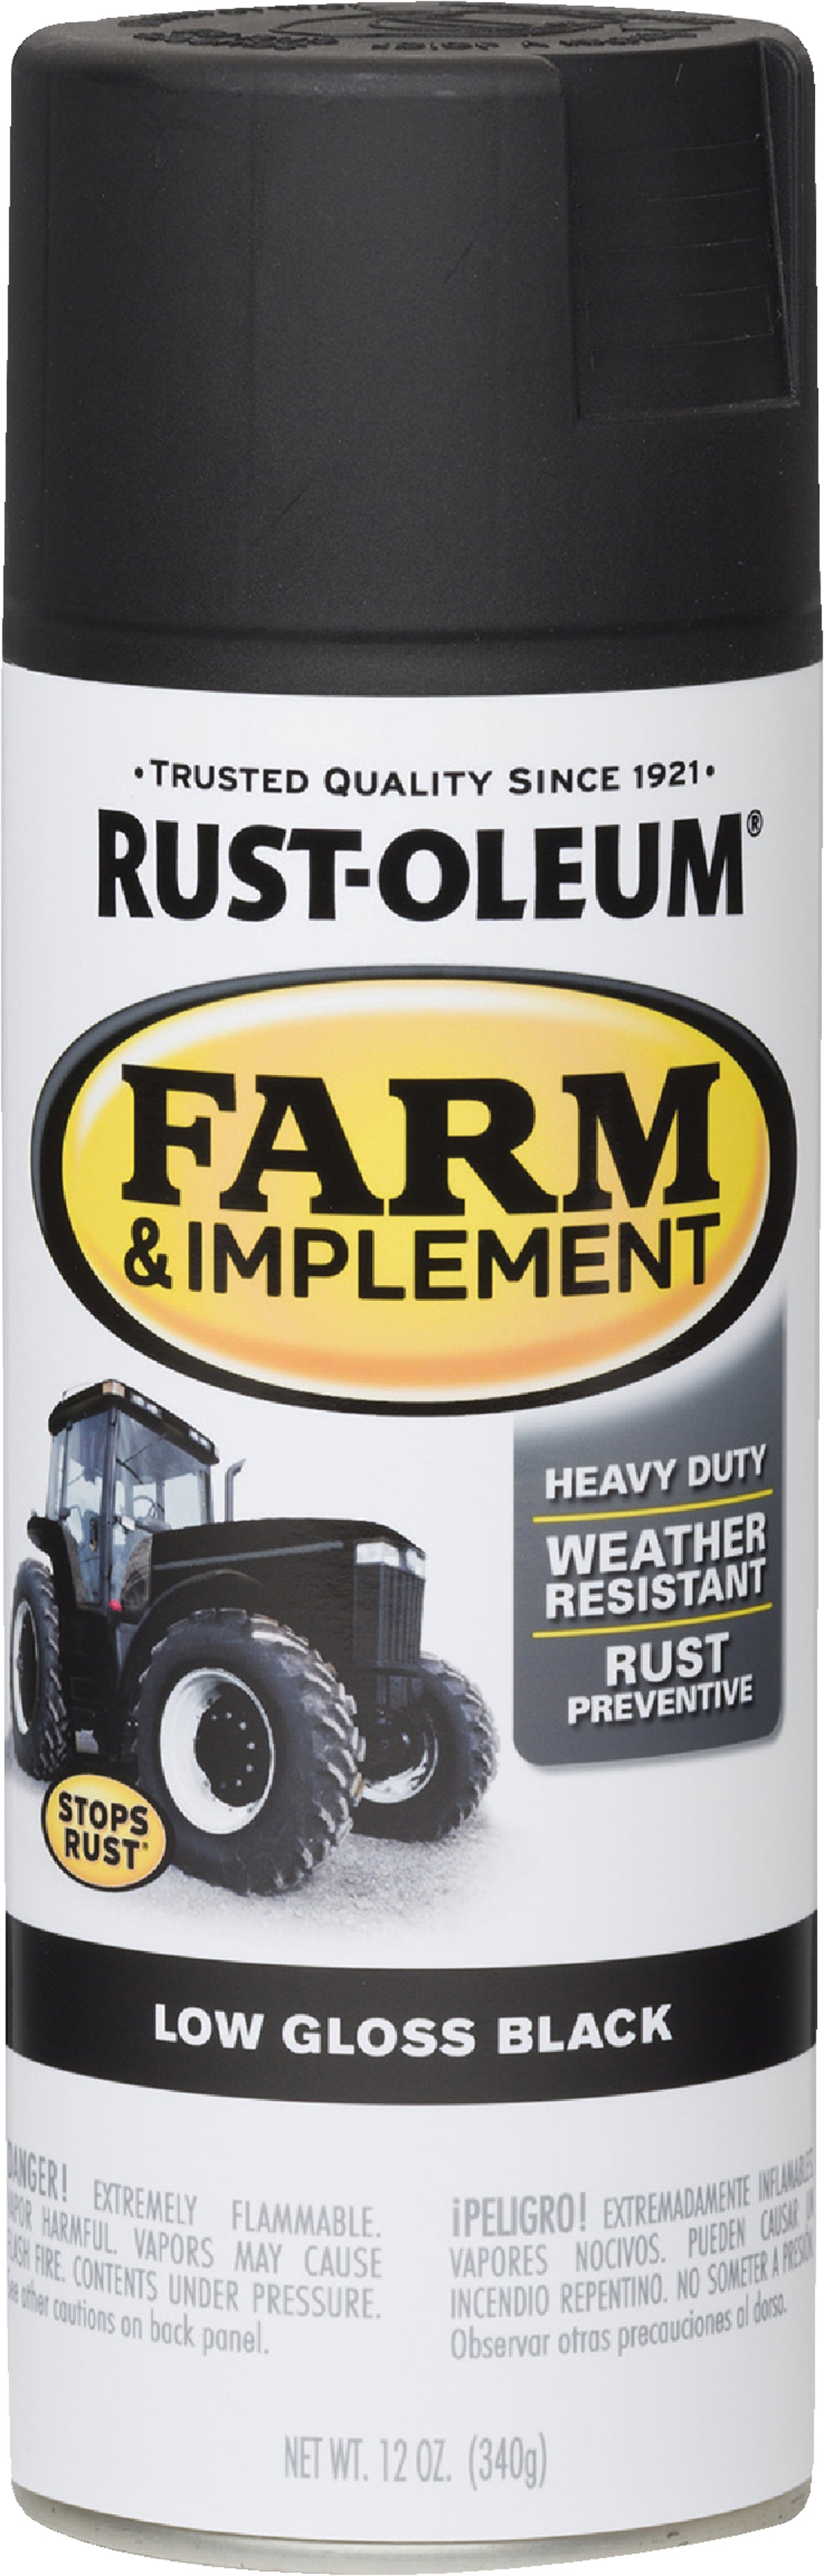 Rust-Oleum Farm & Implement Spray Paint in Low Gloss Black